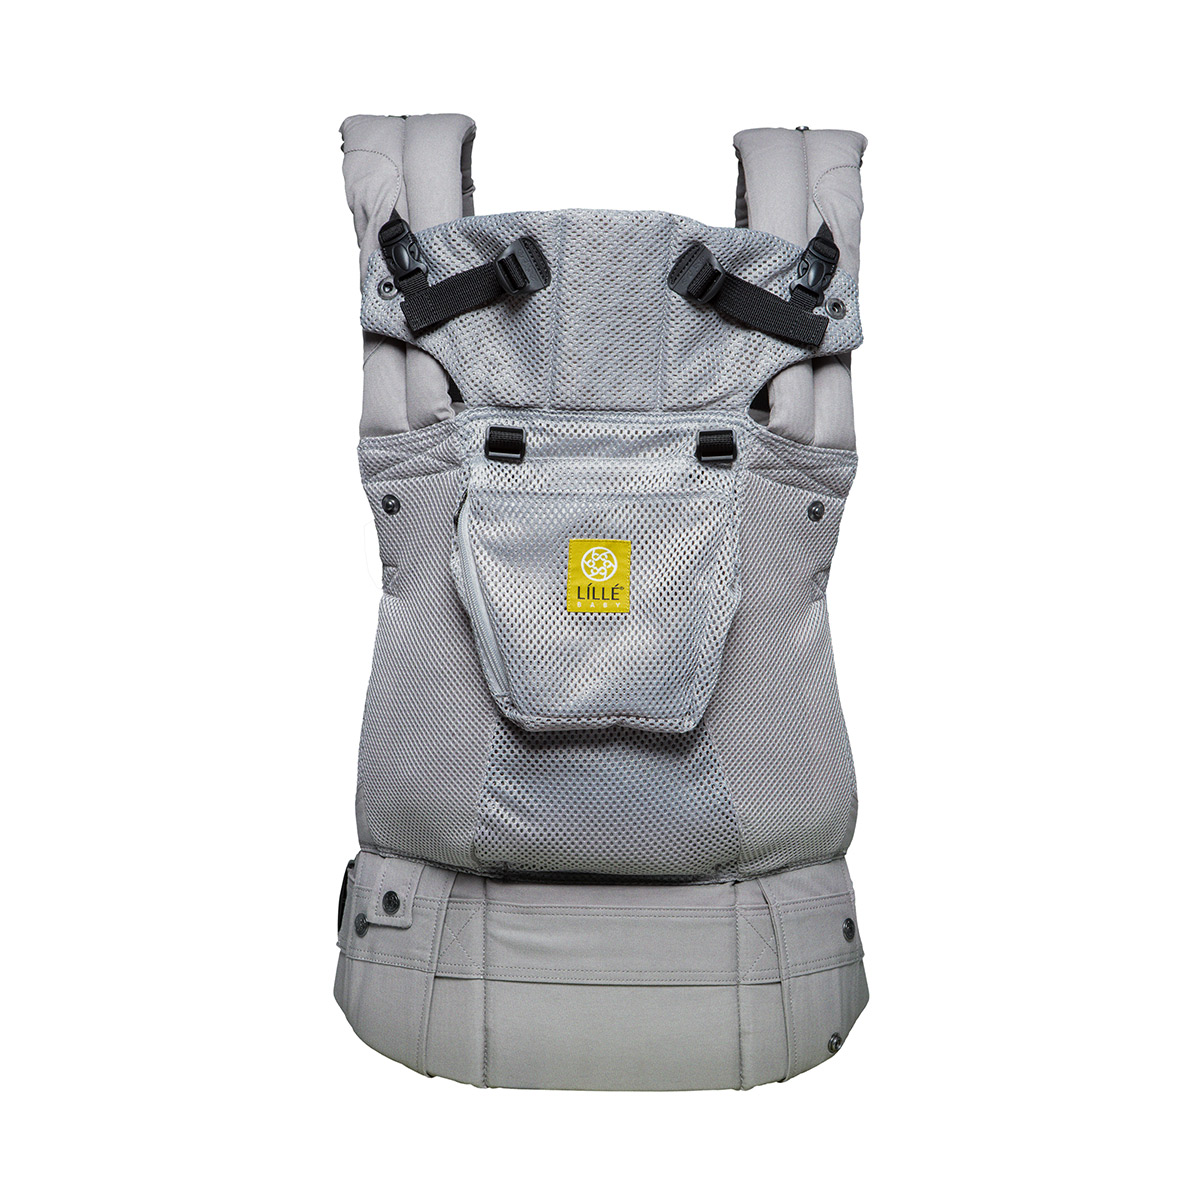 LILLEbaby Airflow Baby Carrier - Mist - image 1 of 5